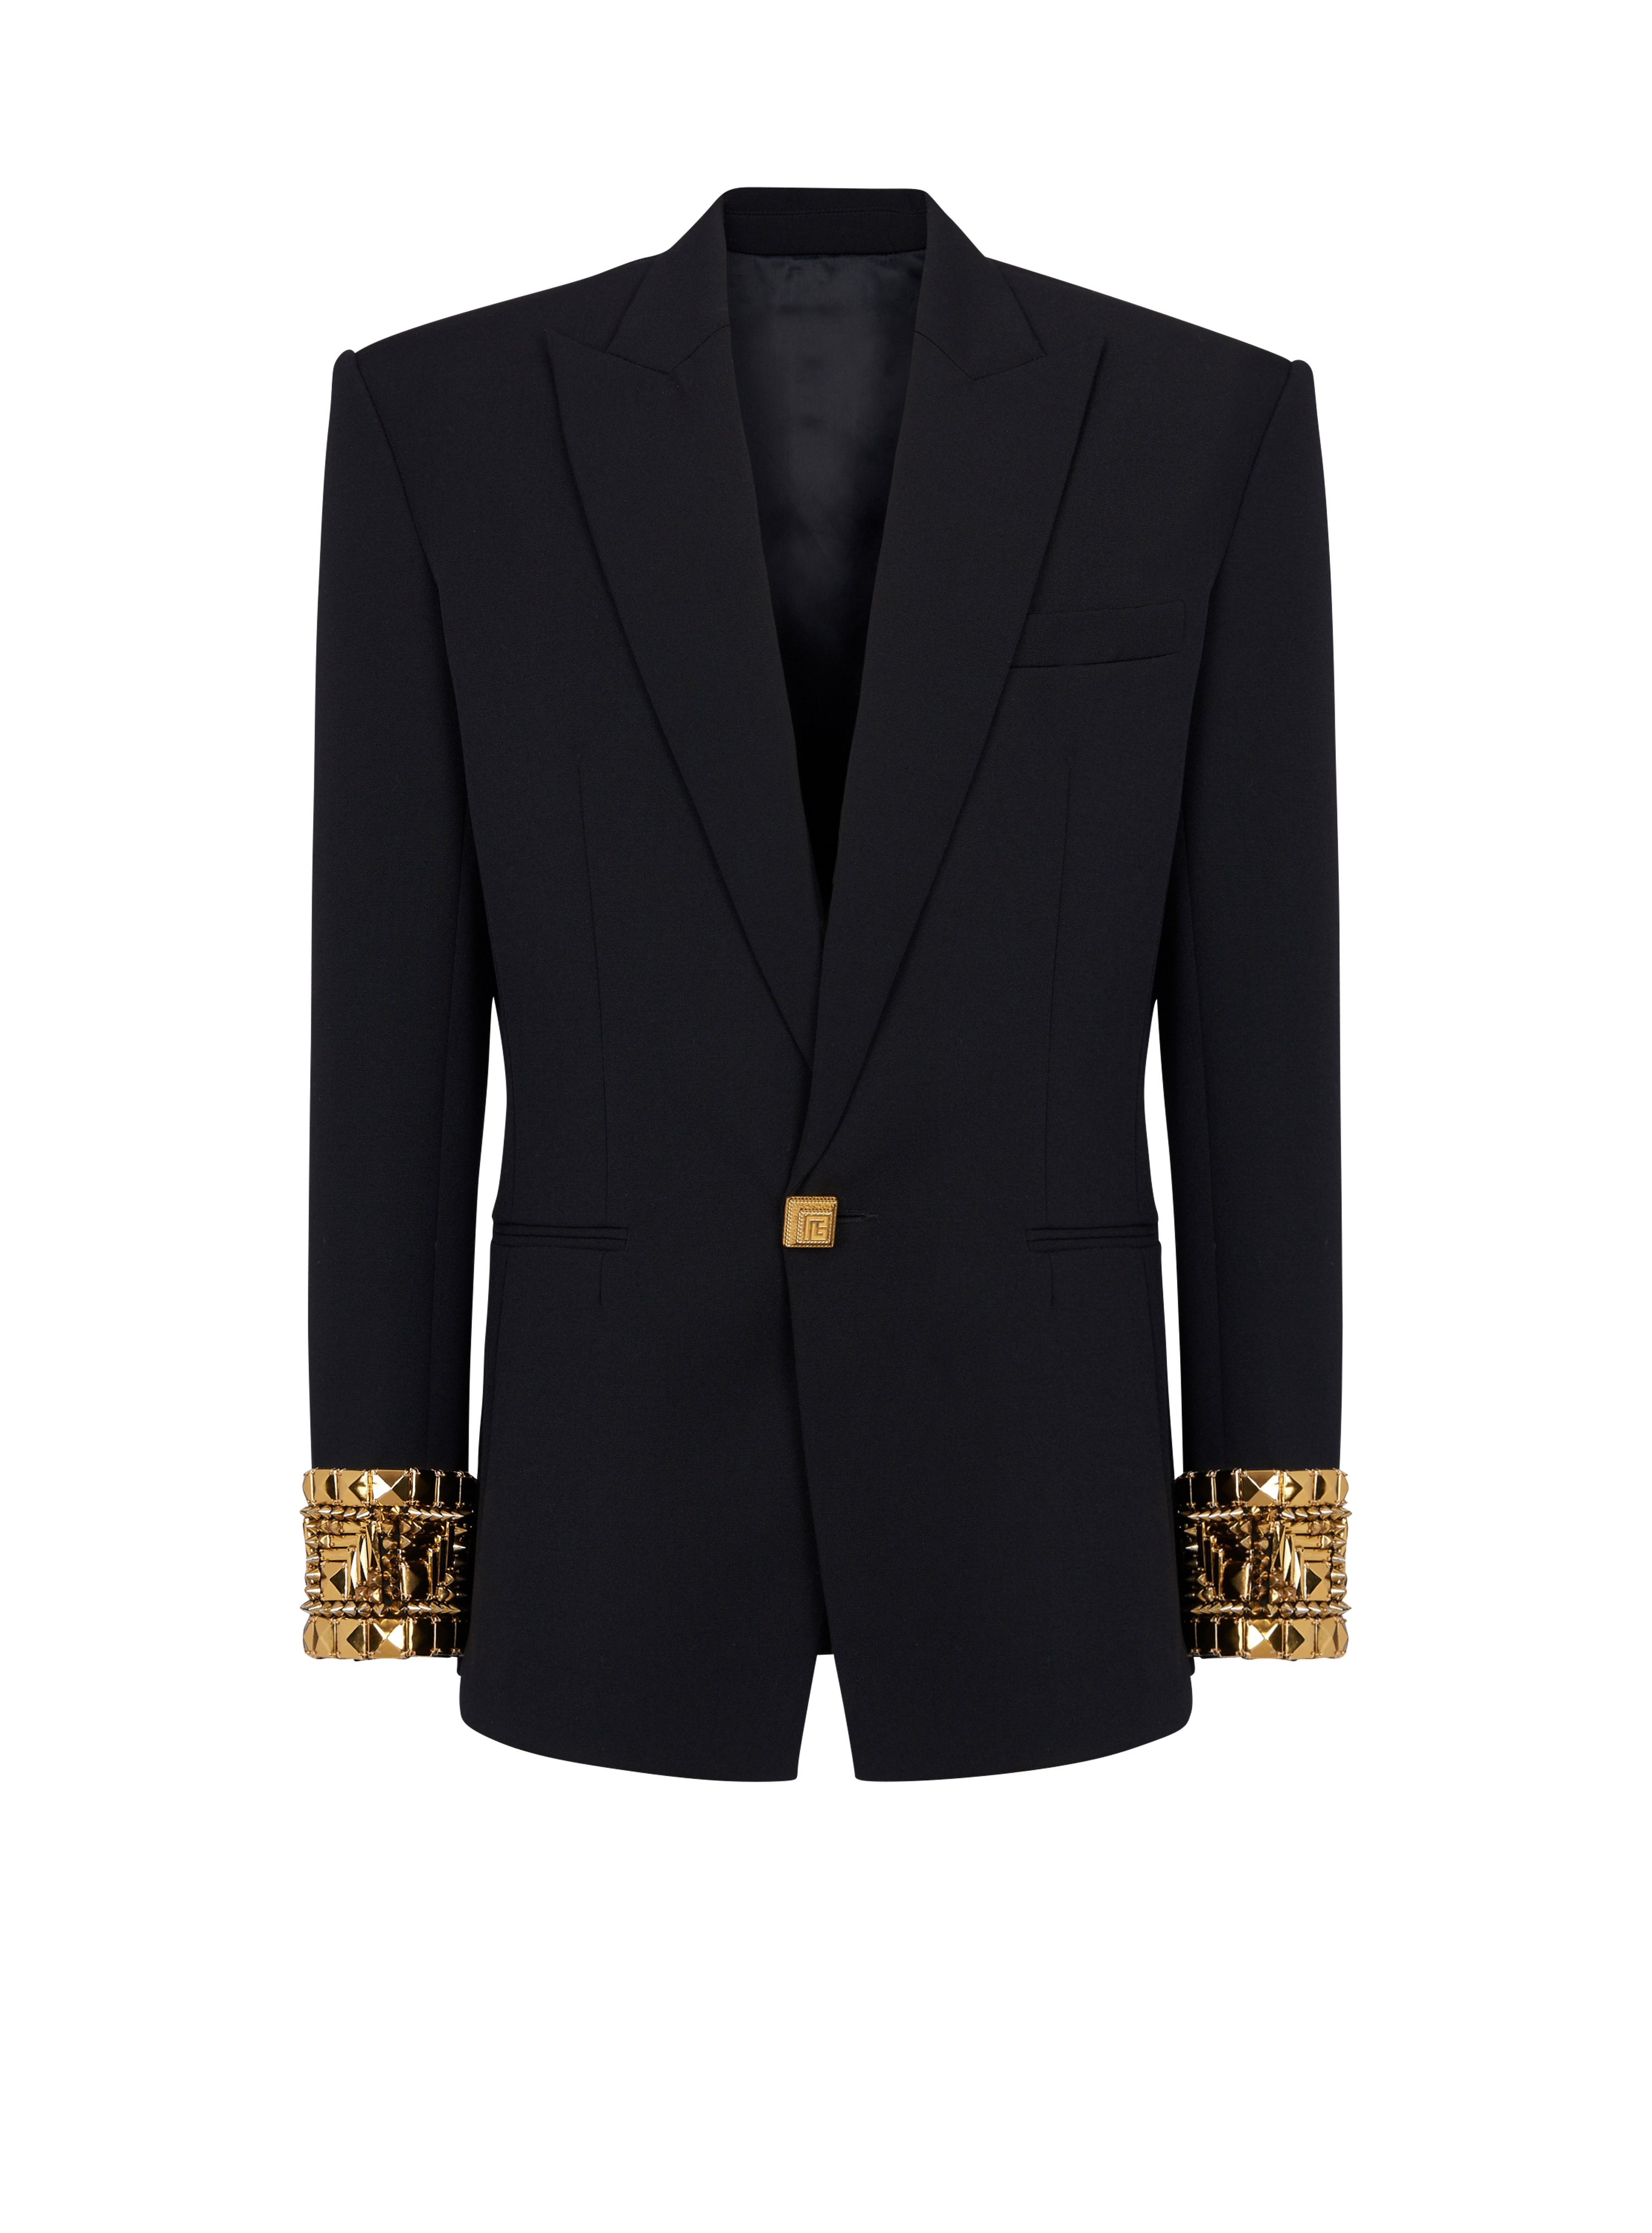 Wool blazer embroidered with pyramid studs, black